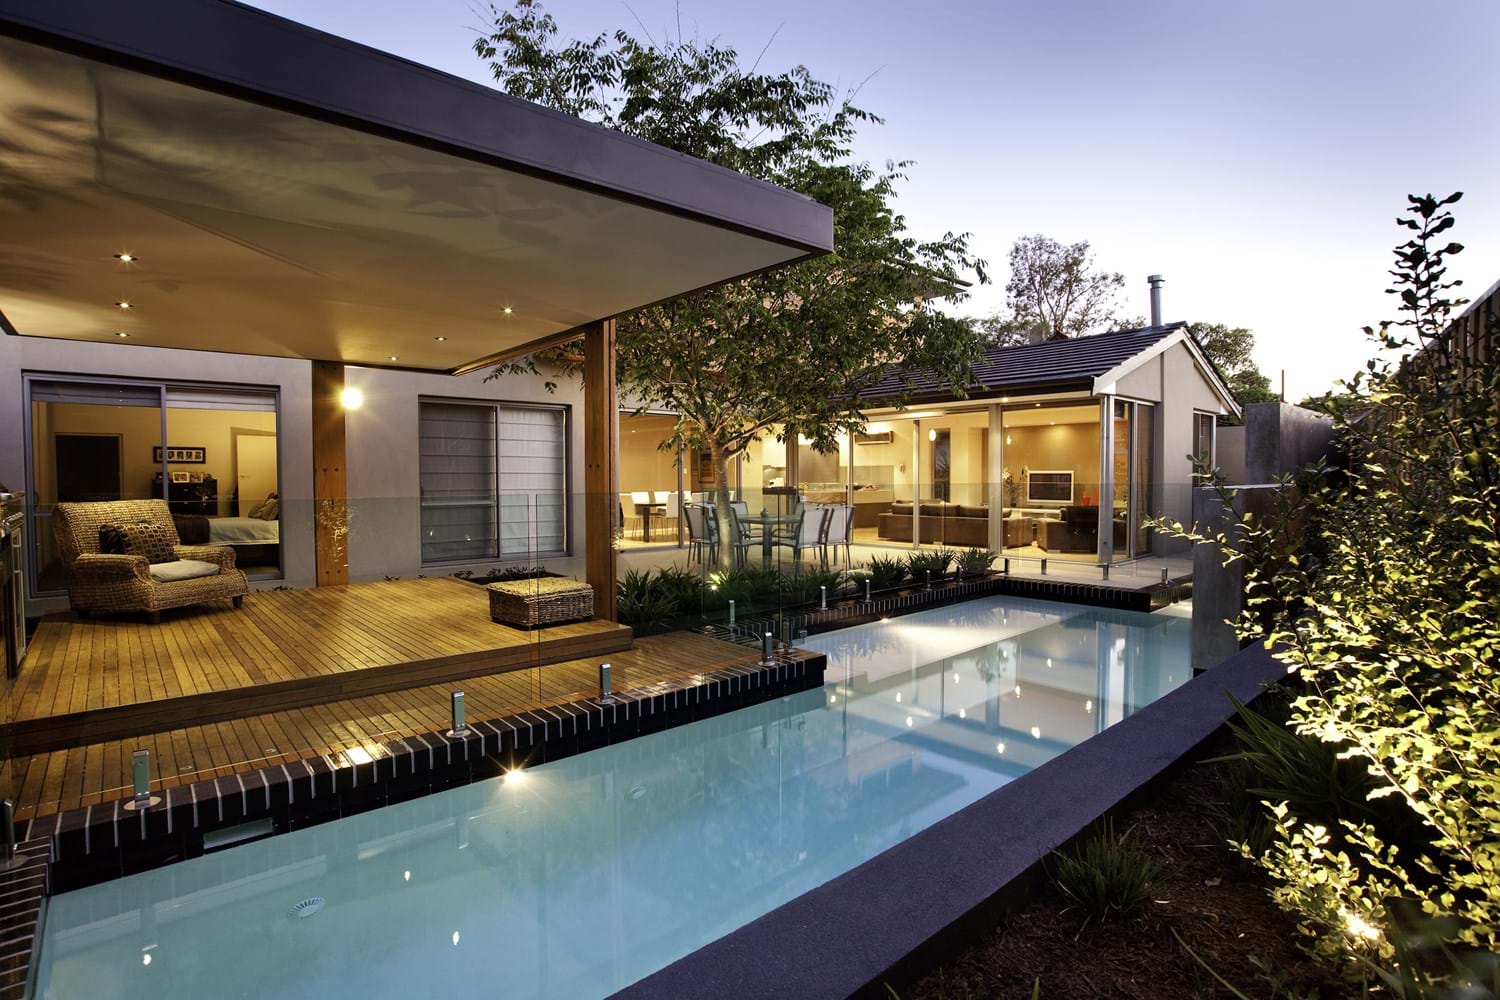 The brief called for an open mixed-use space, to include a pool with water feature and pavilion that enhances the visual transparency to the landscape from the house. A key requirement from the client was to achieve a high-quality architectural finish and create characteristics individual to the design like the glazed black brick capping to the pool and pavilion.